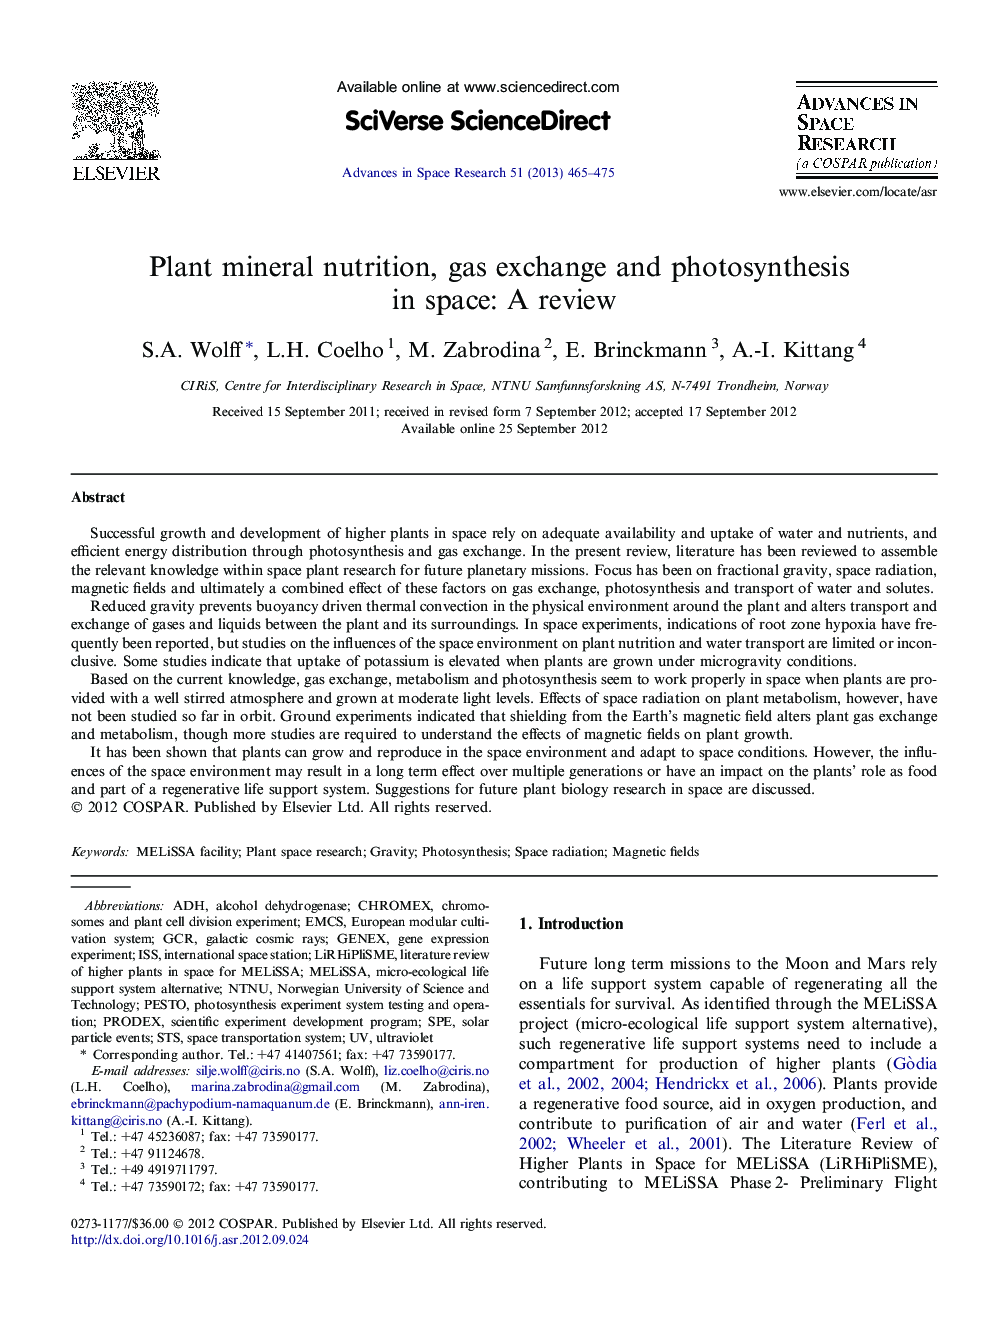 Plant mineral nutrition, gas exchange and photosynthesis in space: A review